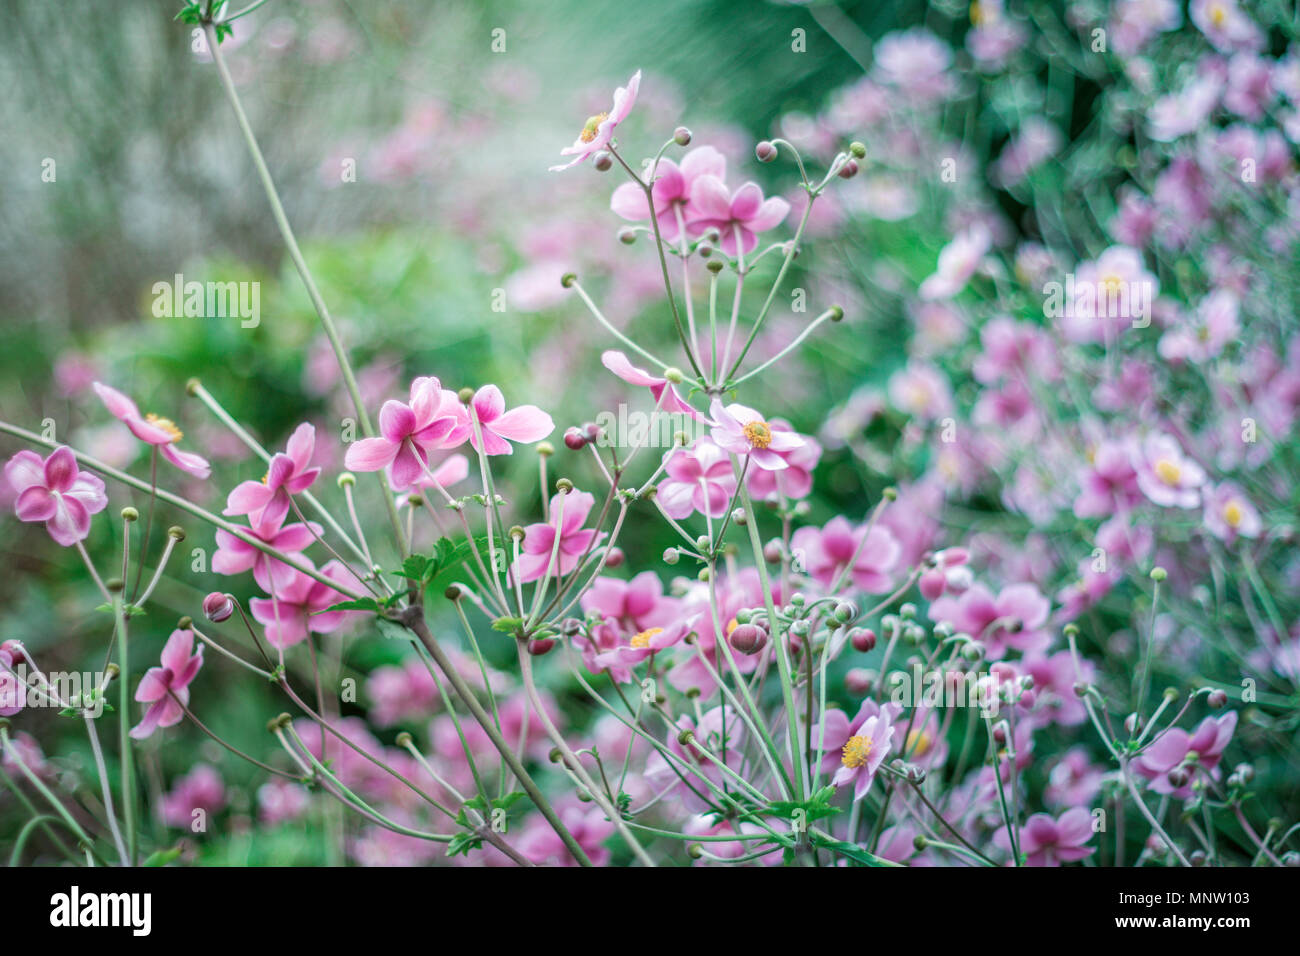 A bright and airy field of small, pink spring flowers. Stock Photo